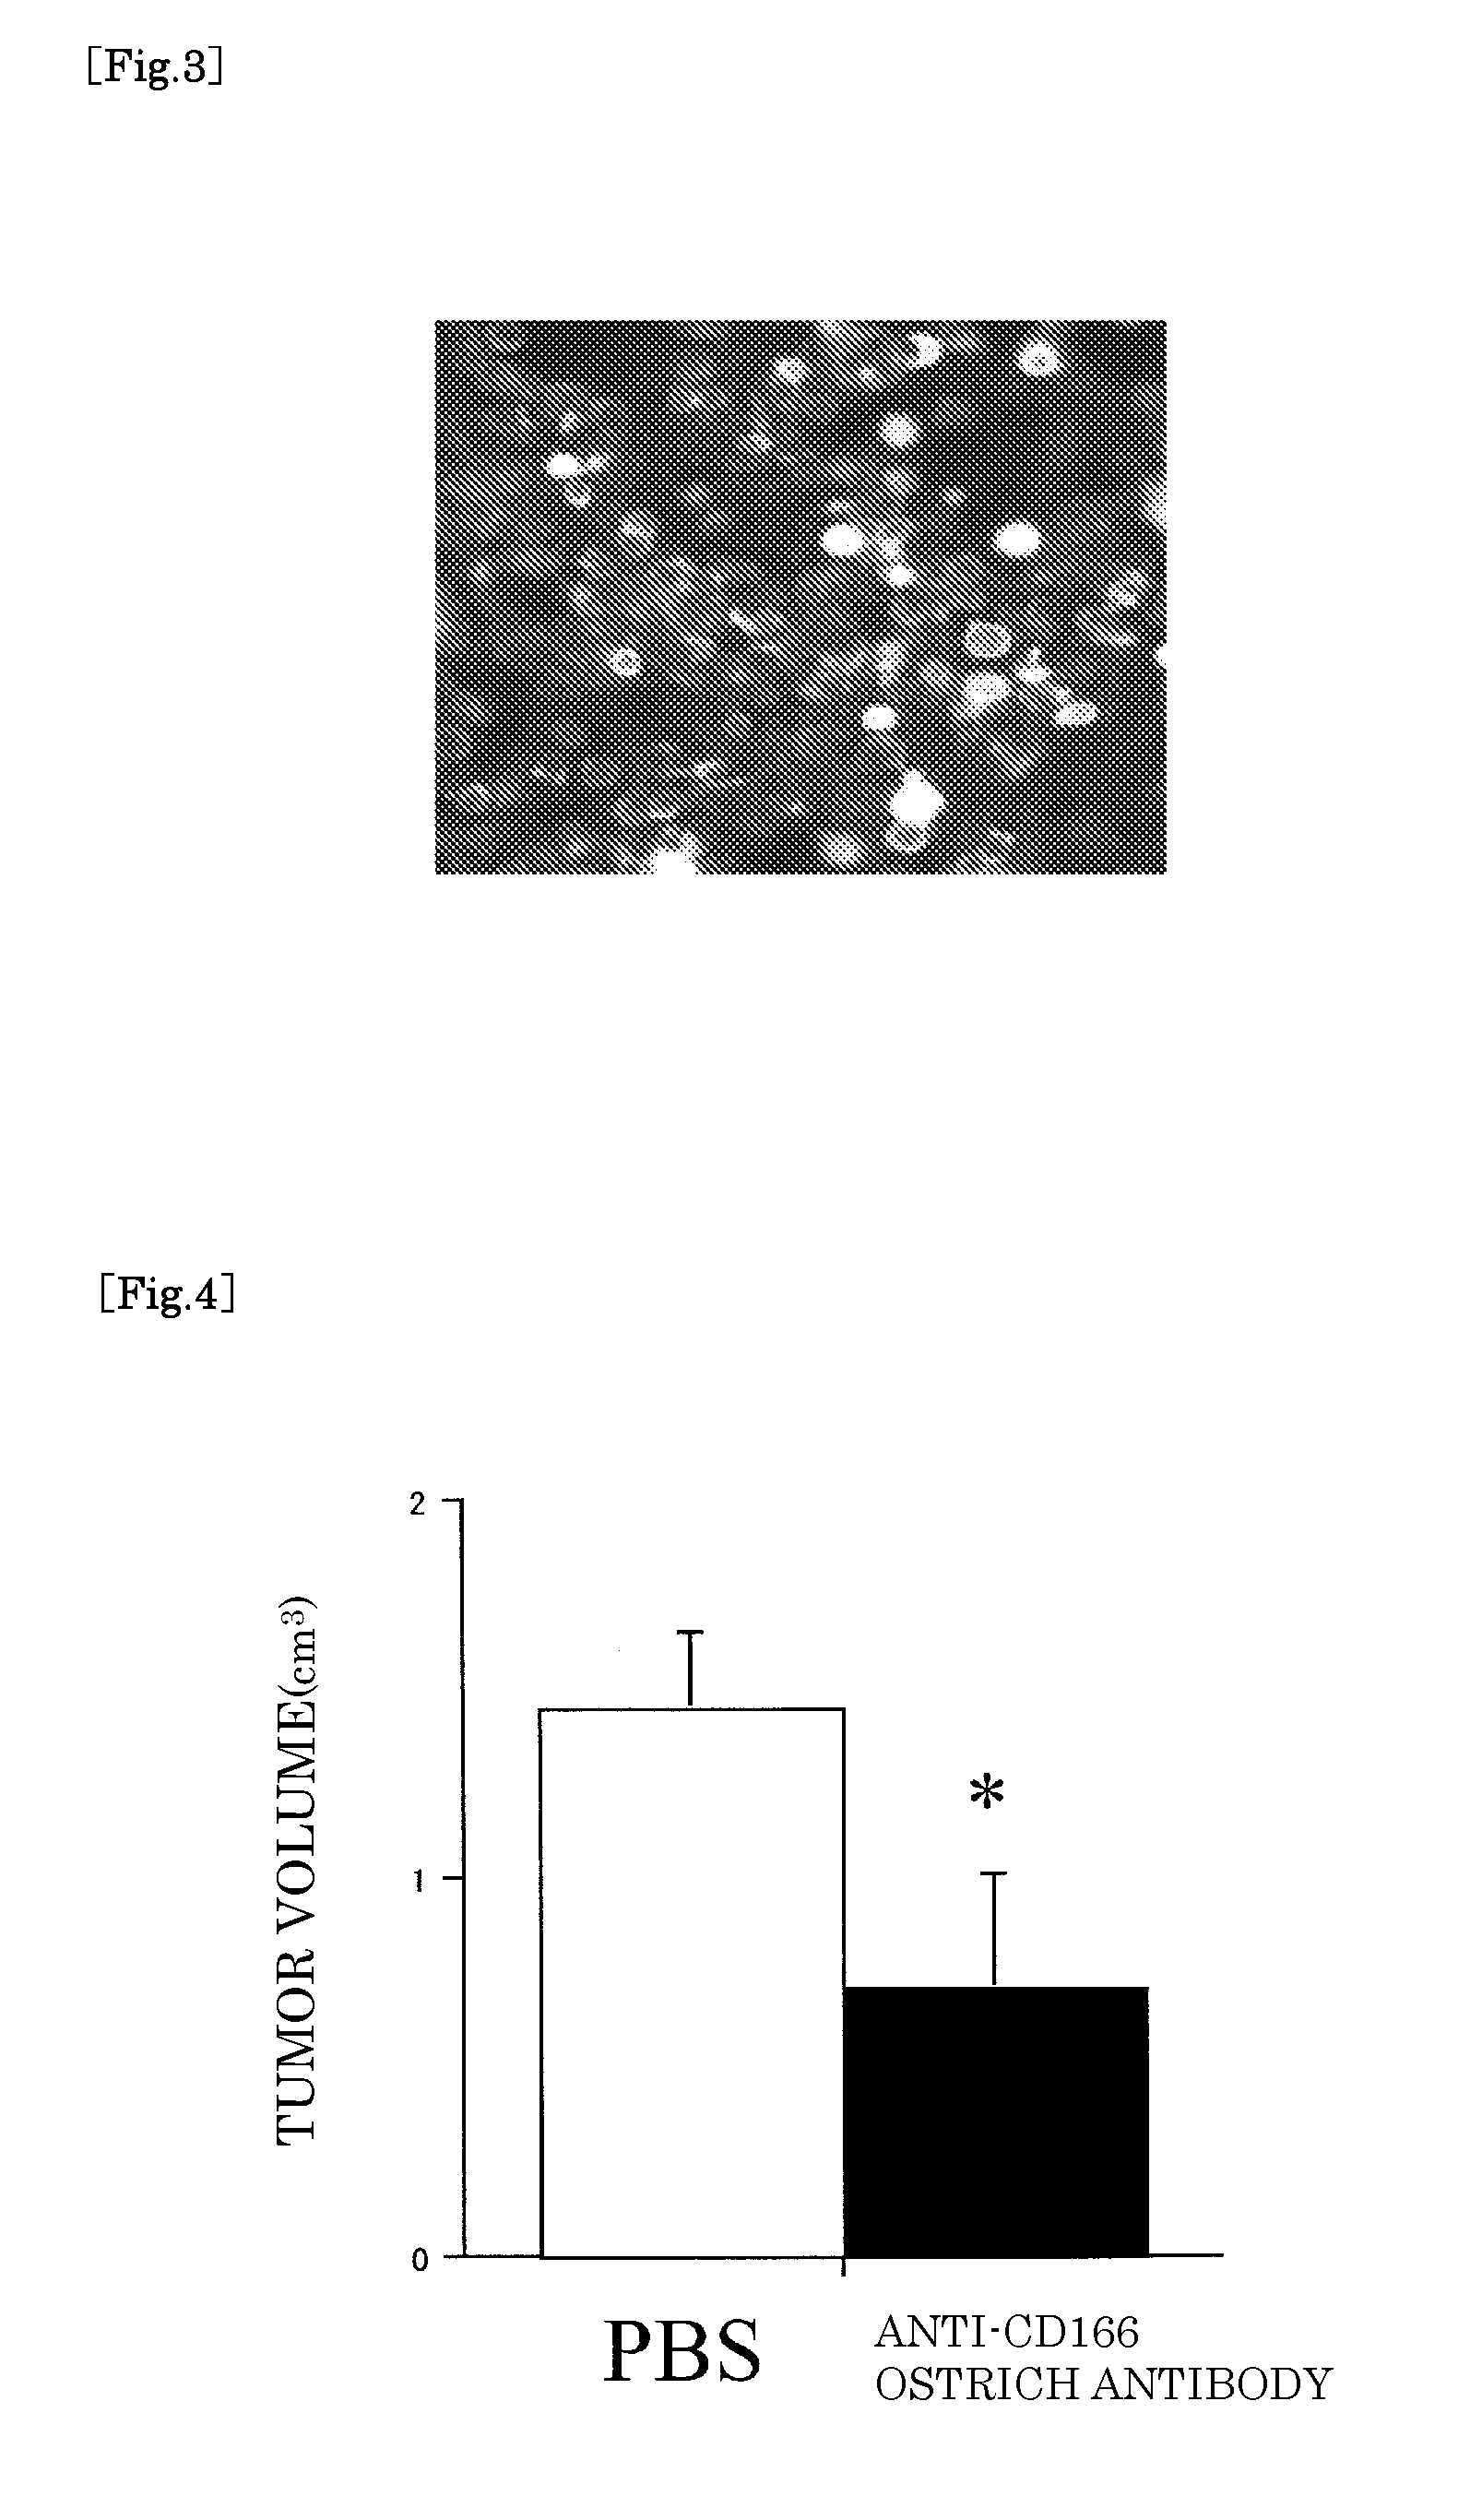 Antibody produced using ostrich and method for production thereof